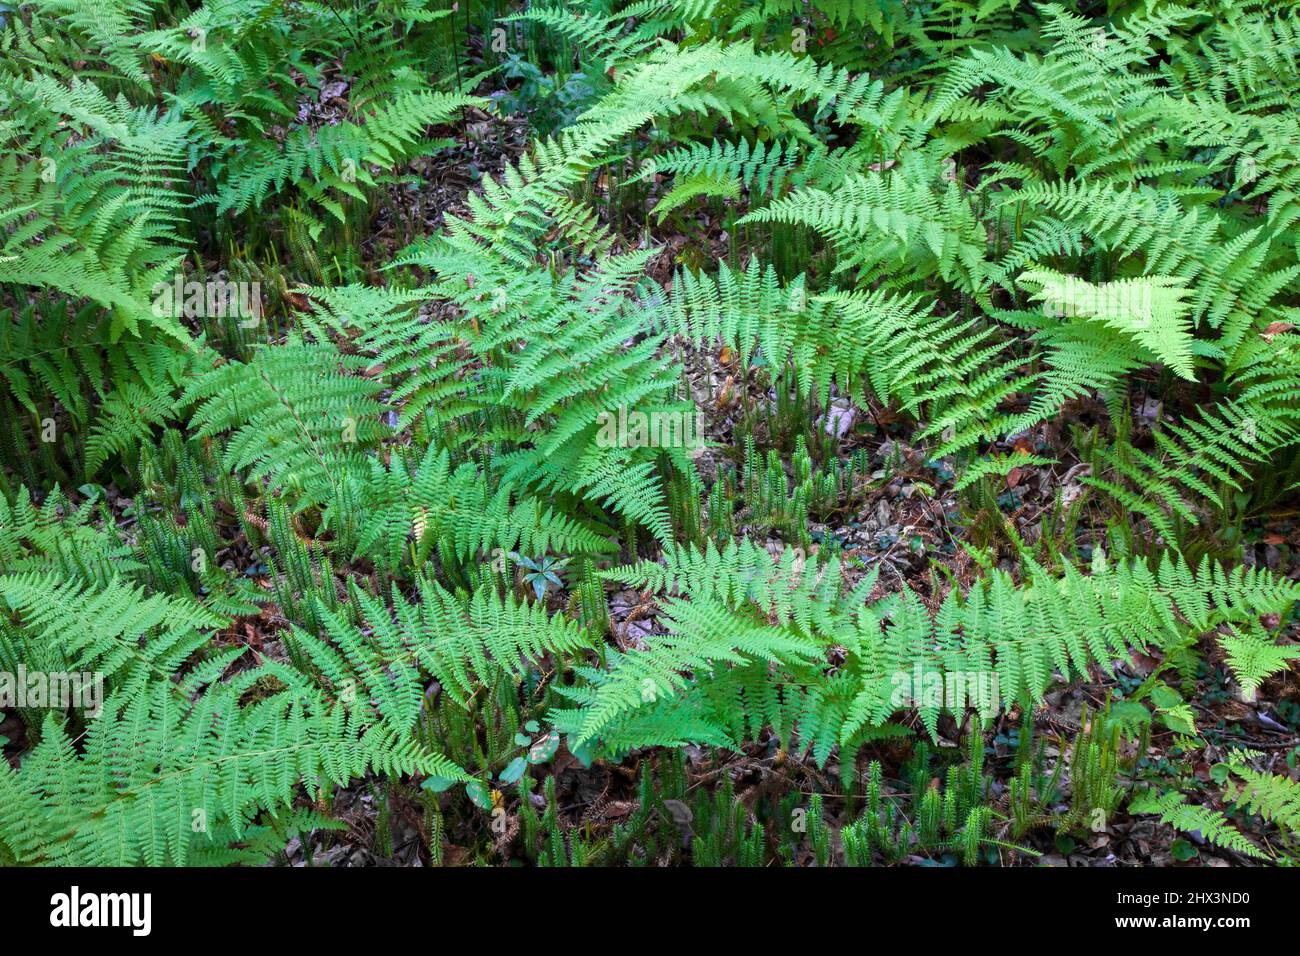 Hayscented Fern and Stiff Clubmoss growing in a moist forest in Pennsylvania's Pocono Mountains Stock Photo